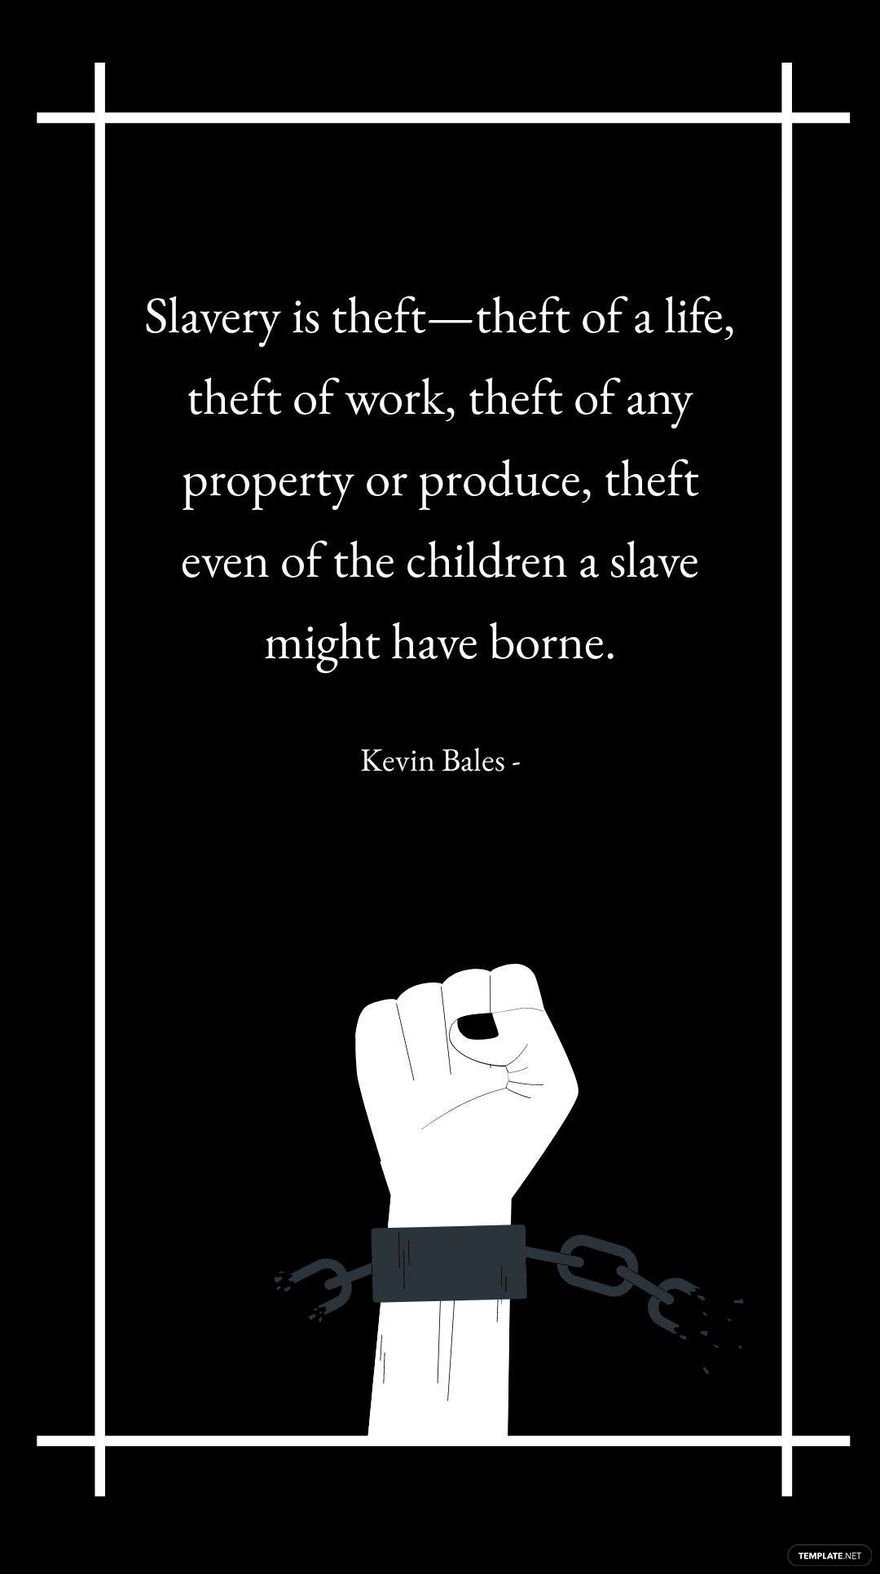 Kevin Bales - Slavery is theft—theft of a life, theft of work, theft of any property or produce, theft even of the children a slave might have borne.